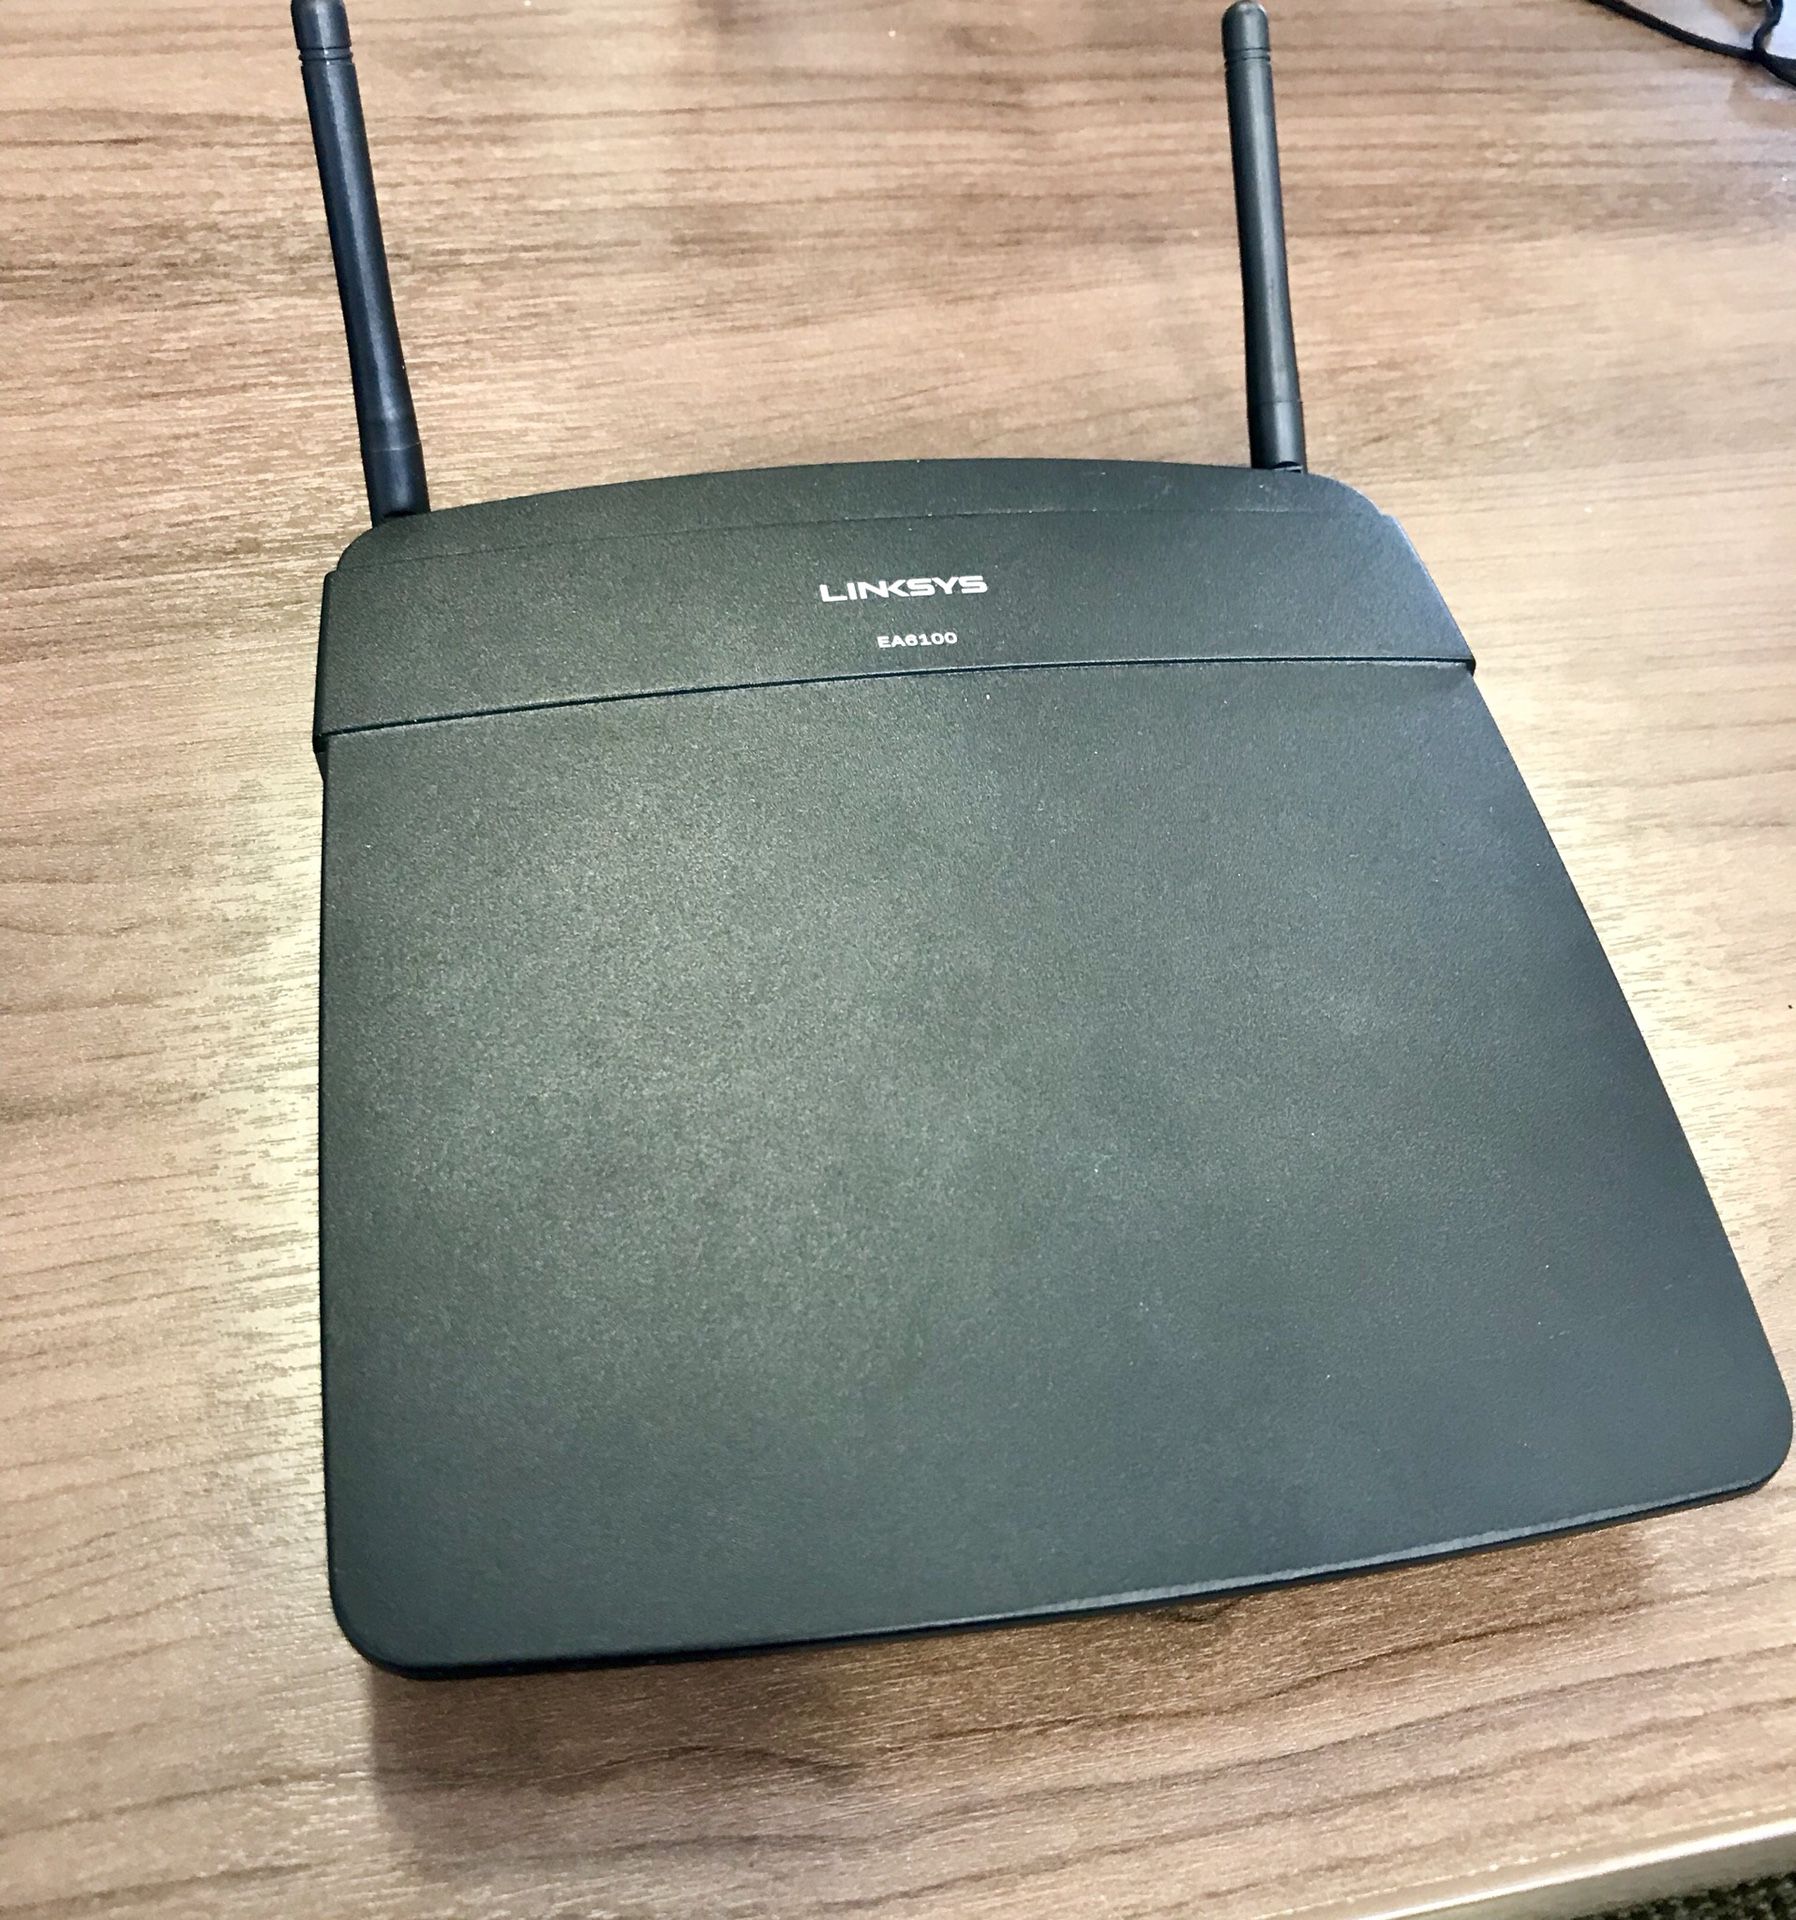 LinkSys EA6100 Wireless Router